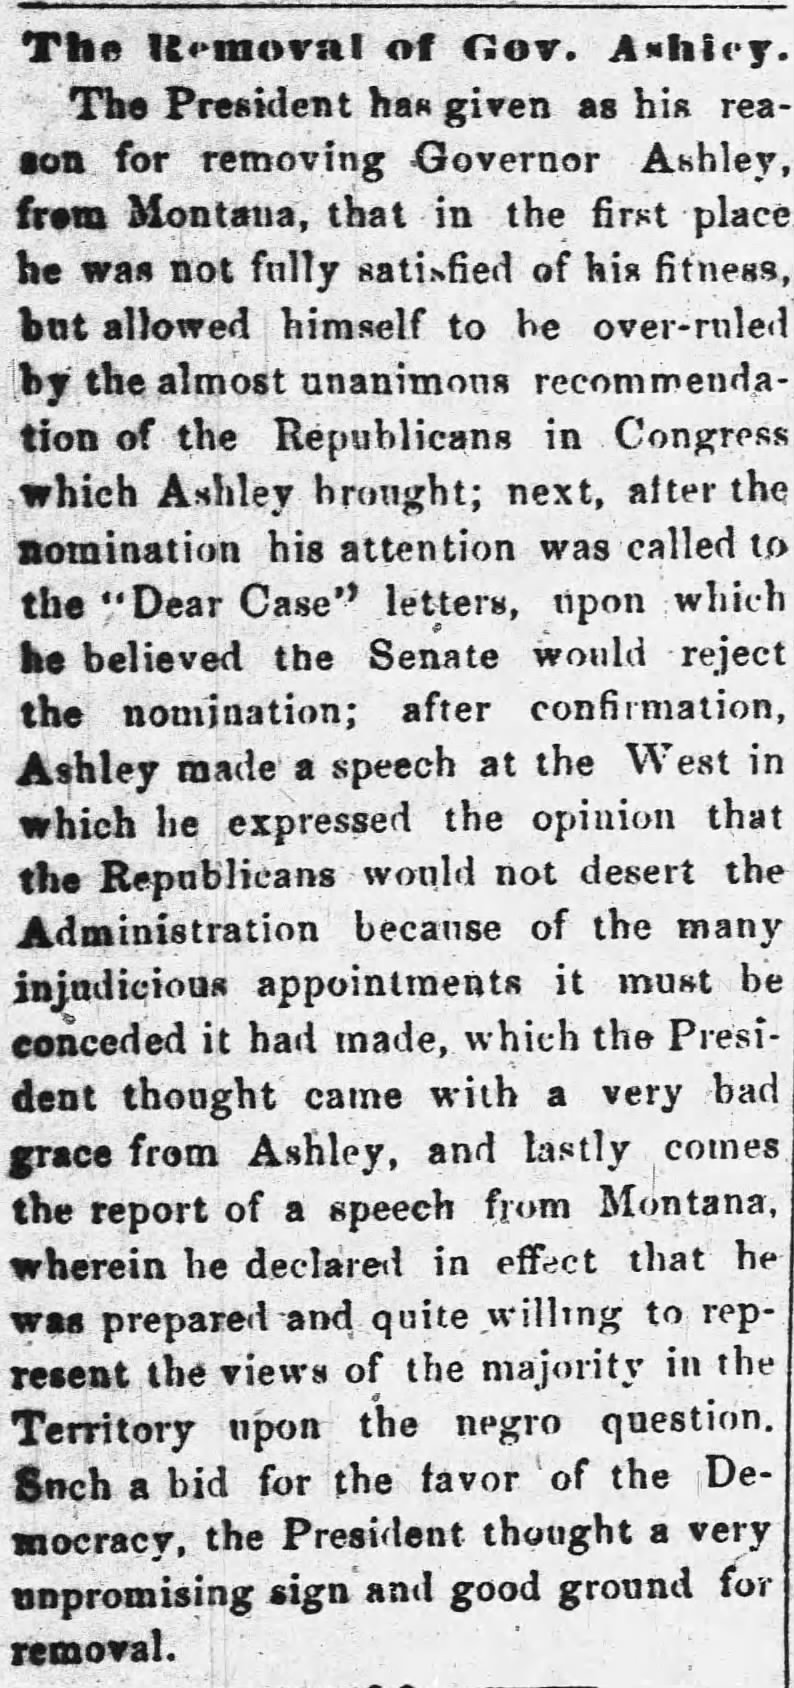 The Removal of Gov. Ashley